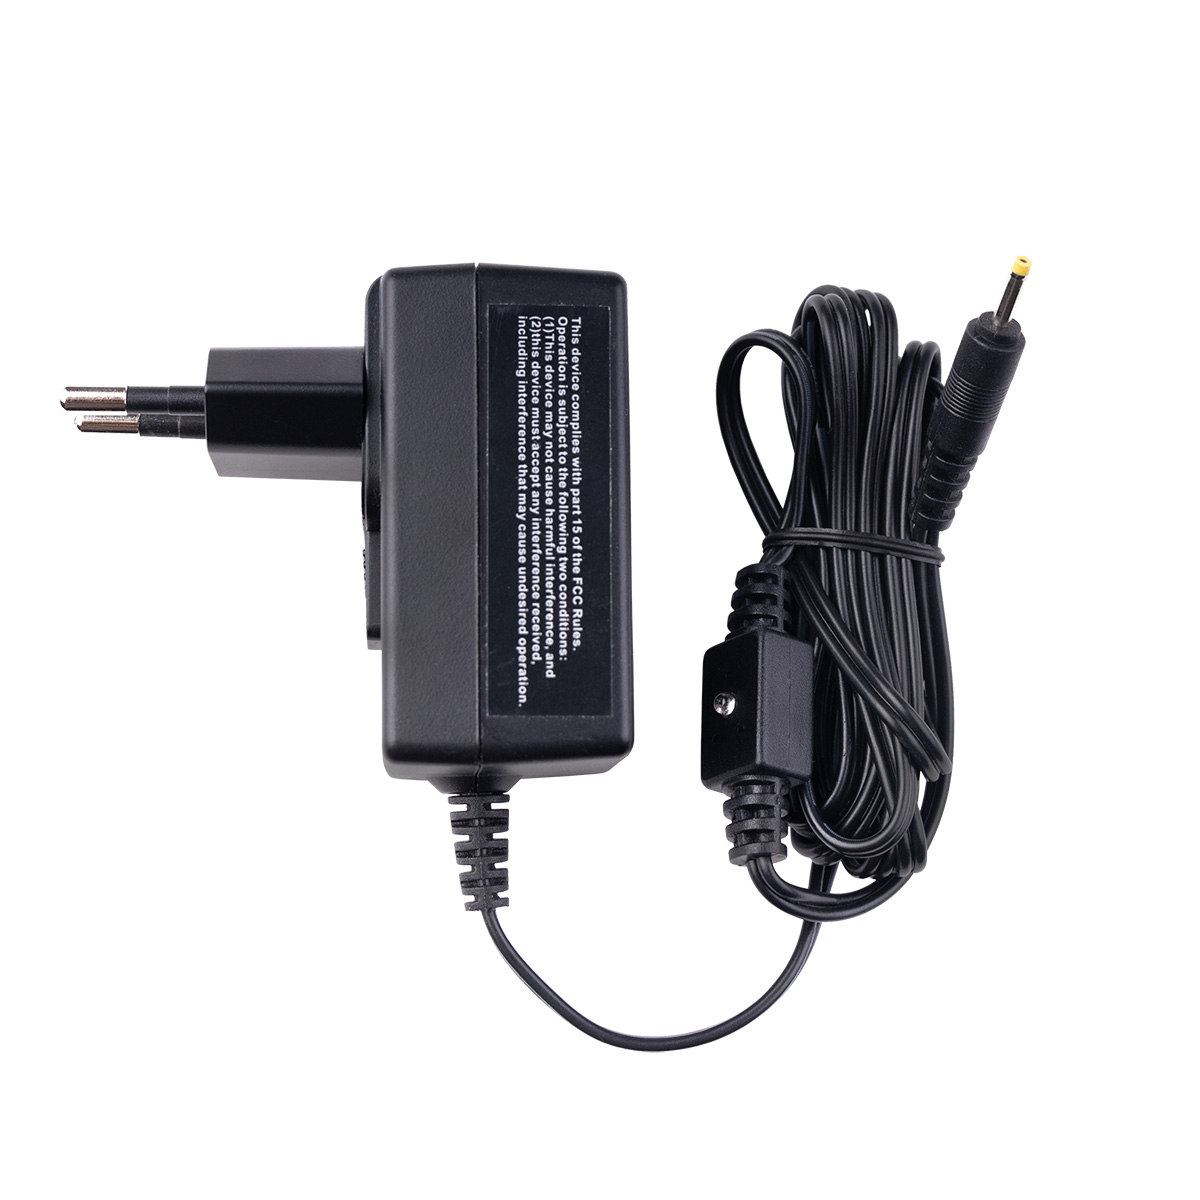 Chargeur rapide universel Leica AA/AA - Lepont Equipements